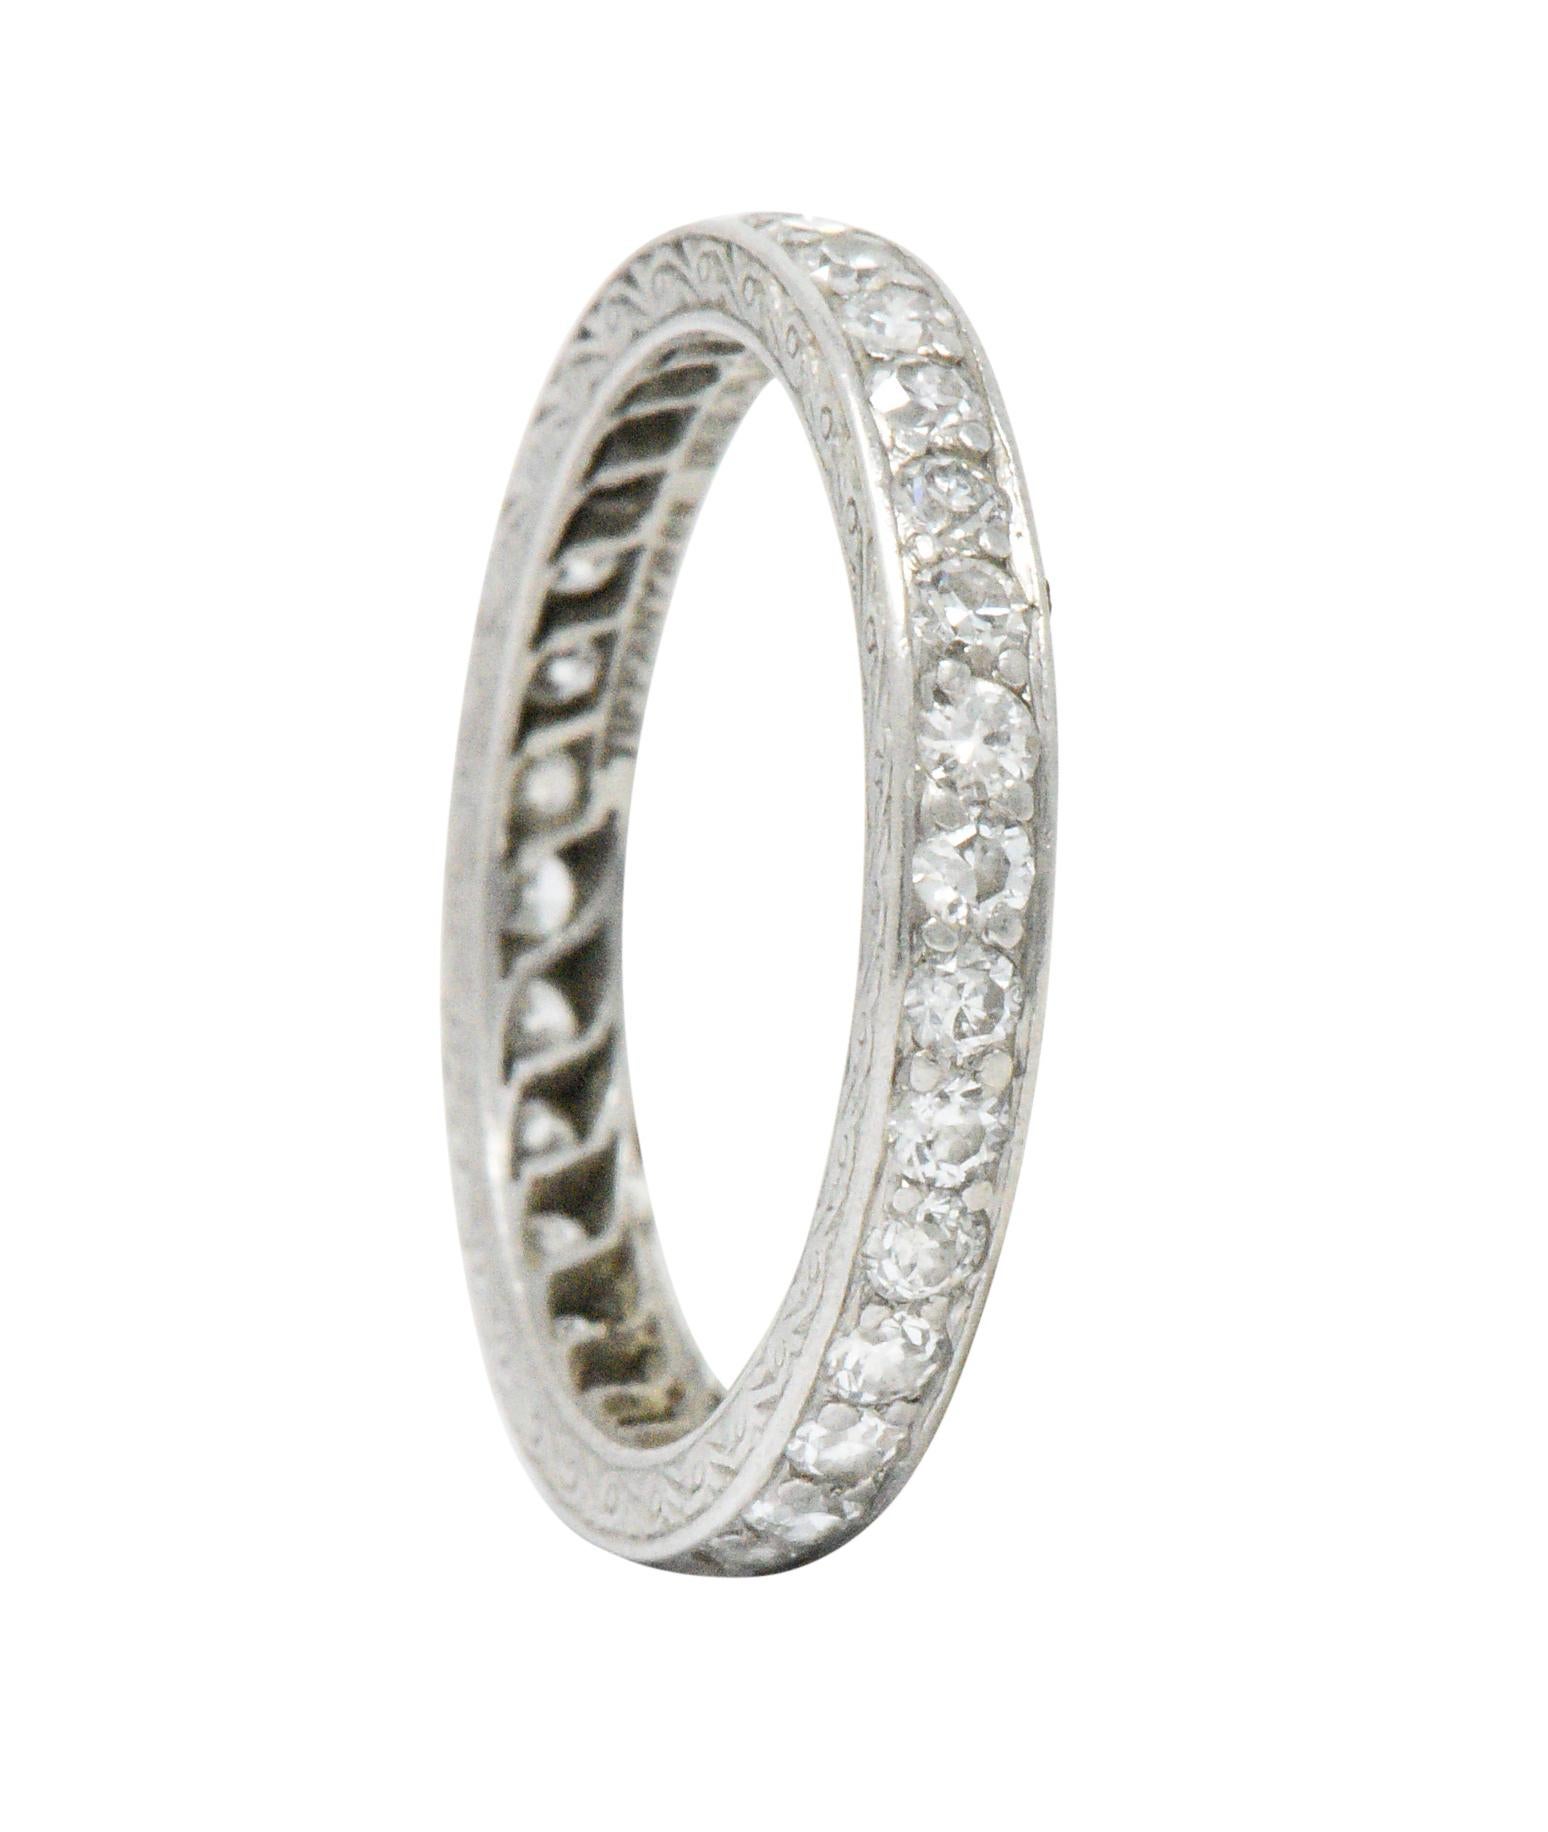 Band entirely set with 32 round Swiss cut diamonds weighing approximately 0.64 CTW, G color and VS to I clarity

Detailed hand engraved scrolled design on both sides of the ring, one side including hand engraved initials with date

Fully signed